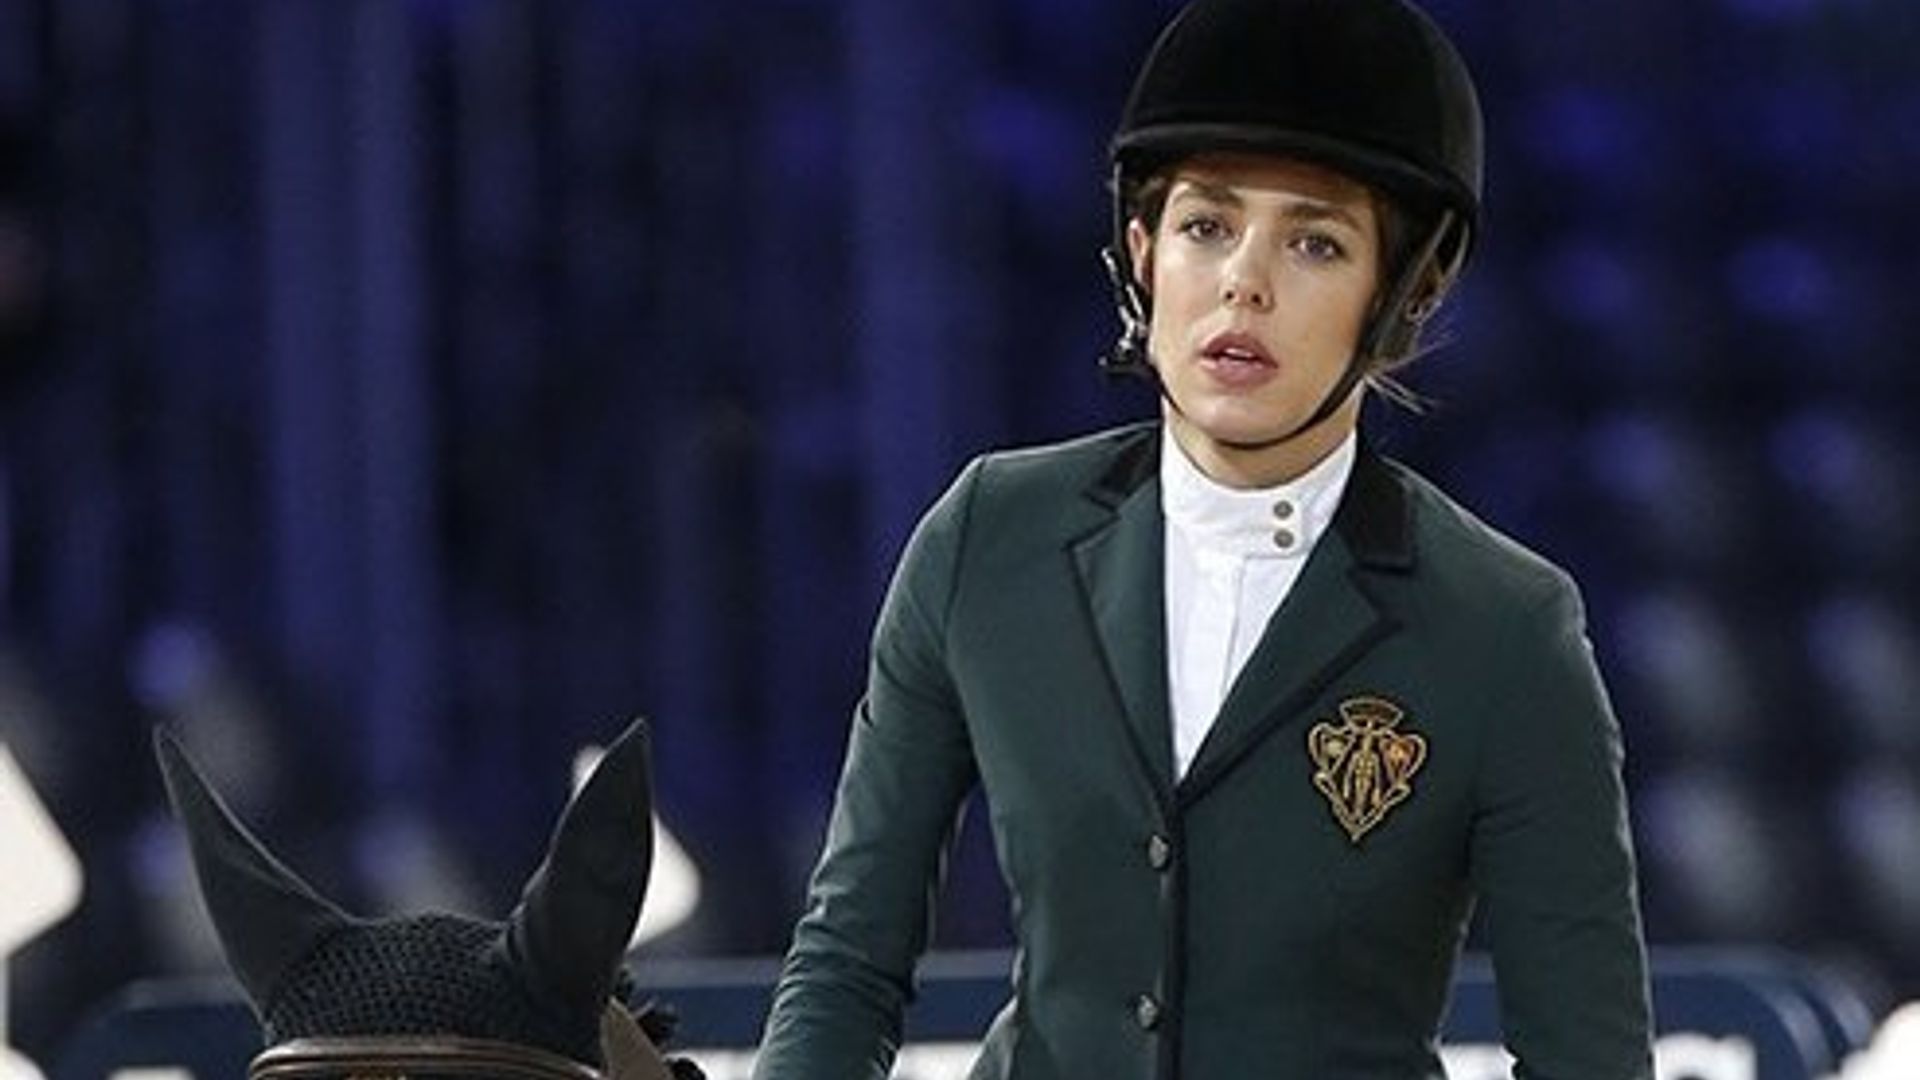 Monaco's Charlotte Casiraghi shows off her royal riding skills